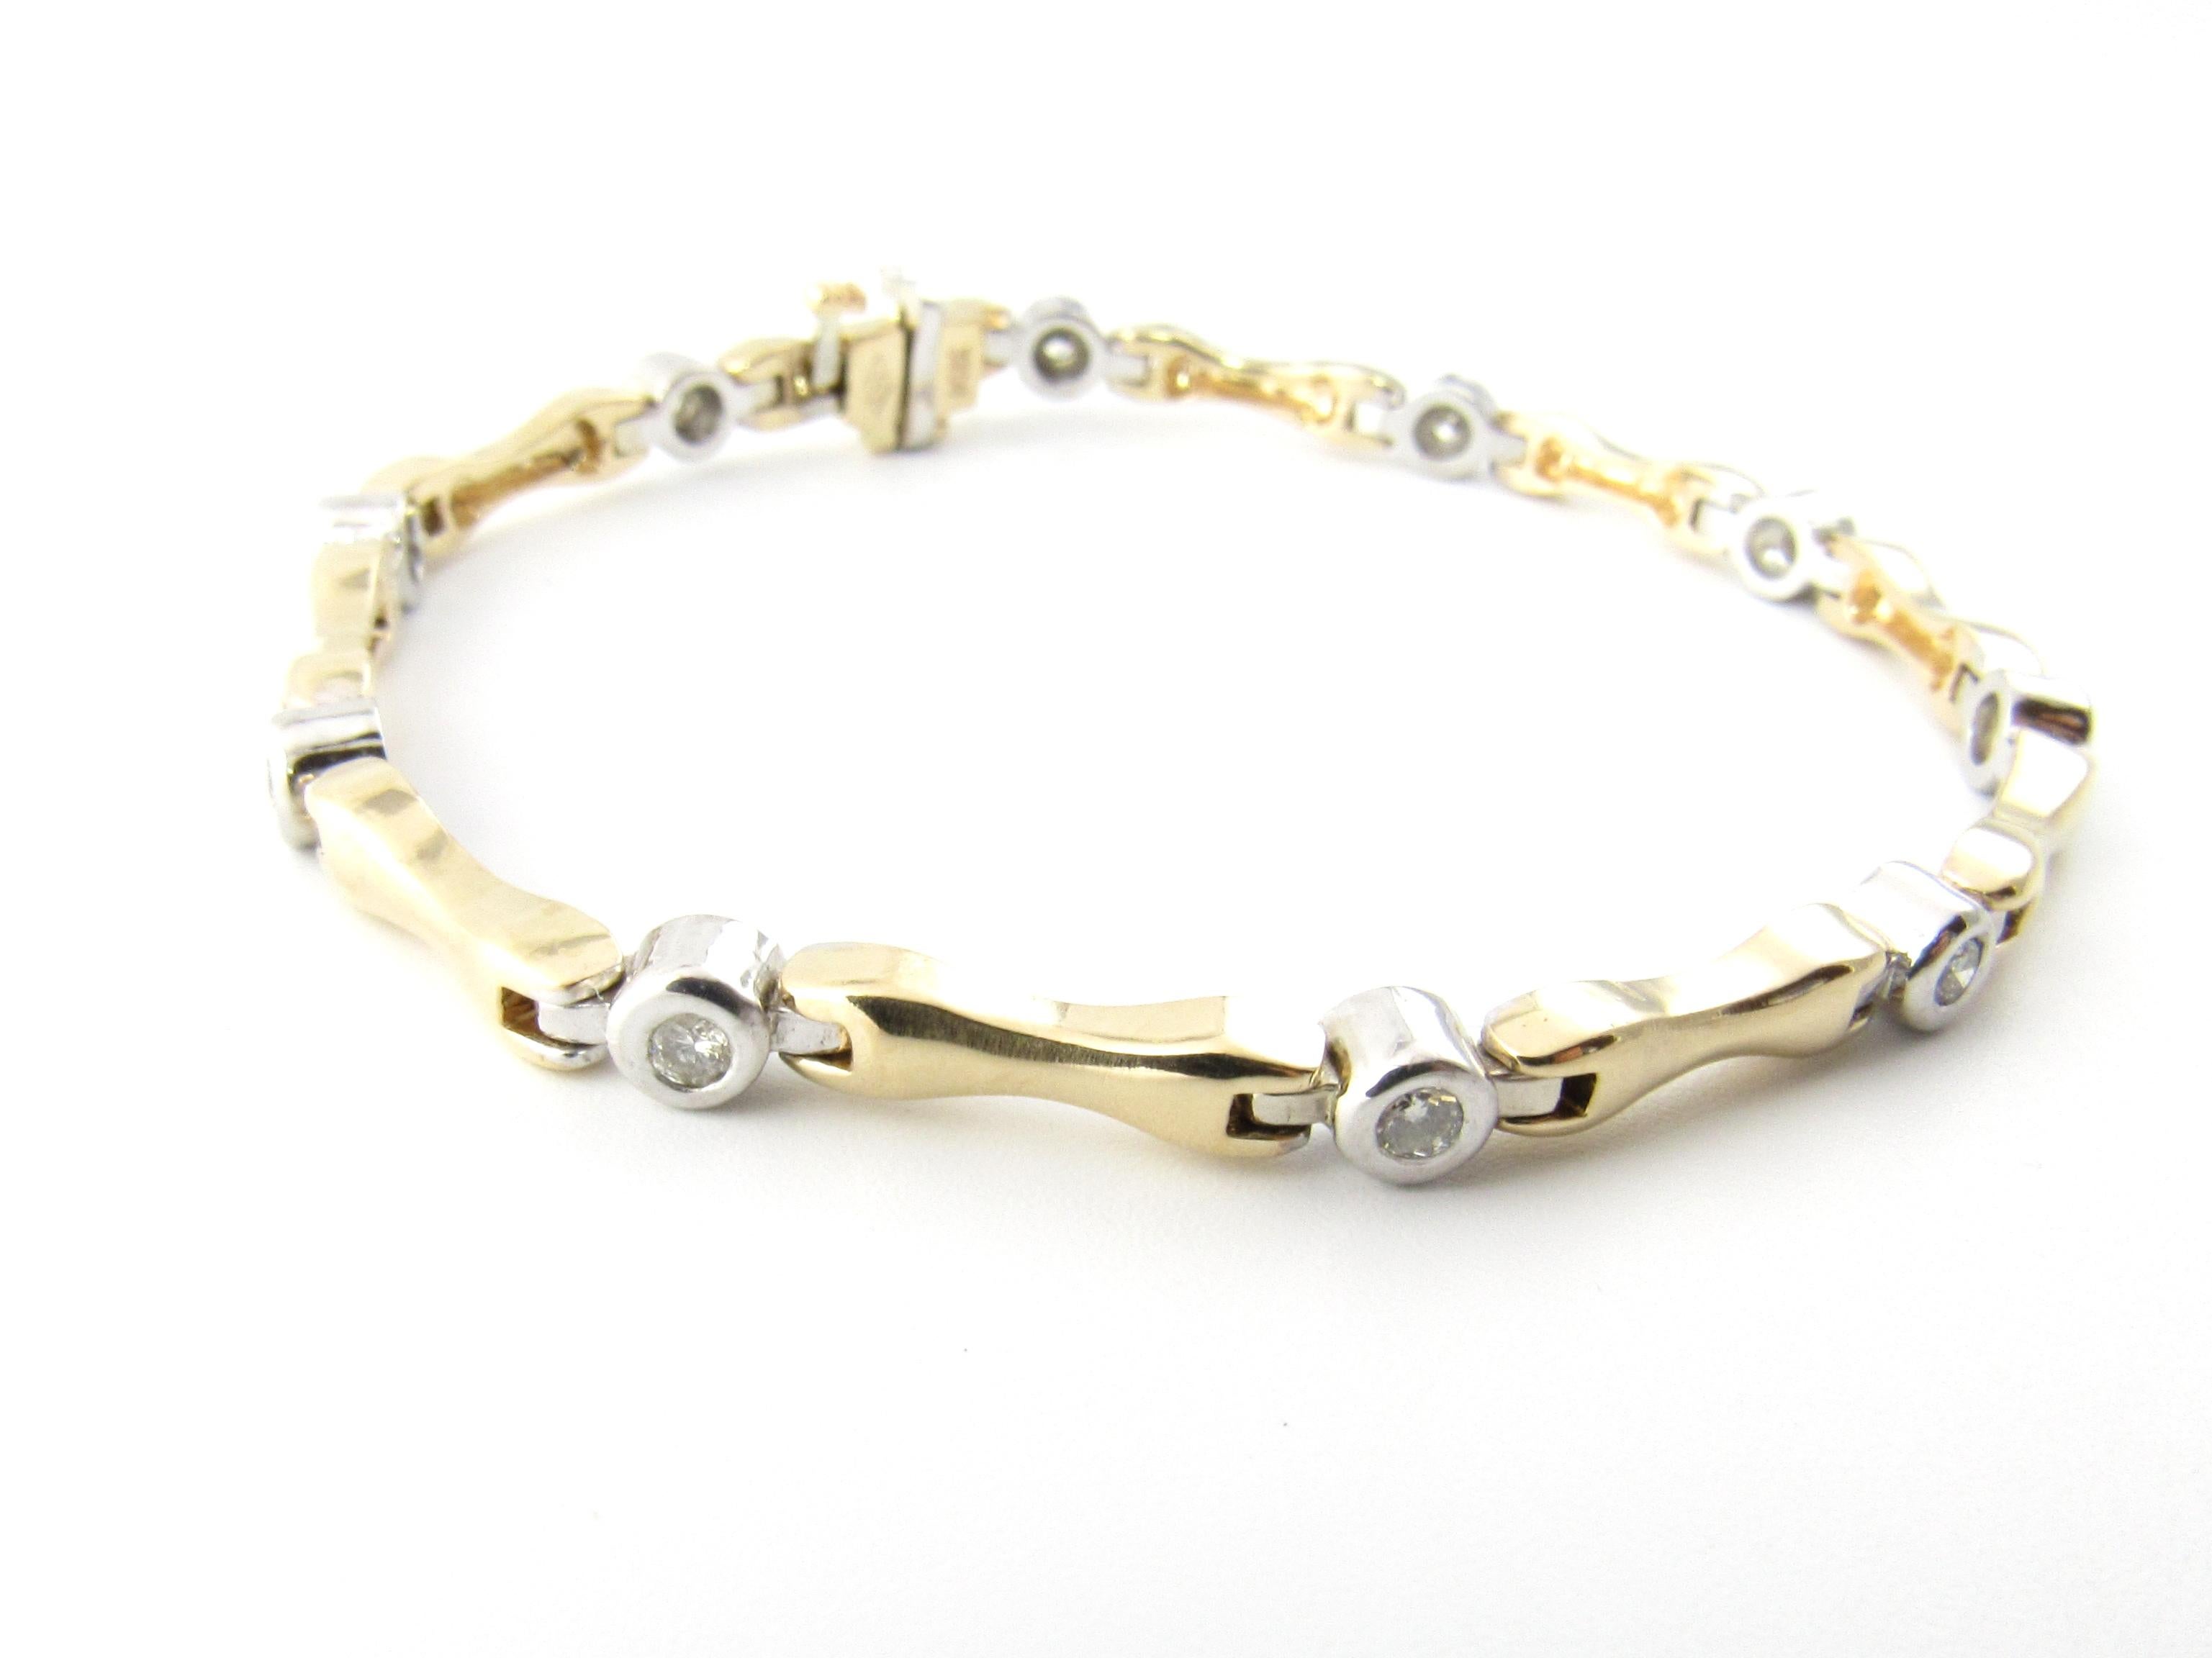 Vintage 14 Karat Yellow and White Gold and Diamond Bracelet

This sparkling bracelet features ten round brilliant cut diamonds set in beautifully detailed 14K white gold with yellow gold links

Width: 4 mm.

Approximate total diamond weight: .50